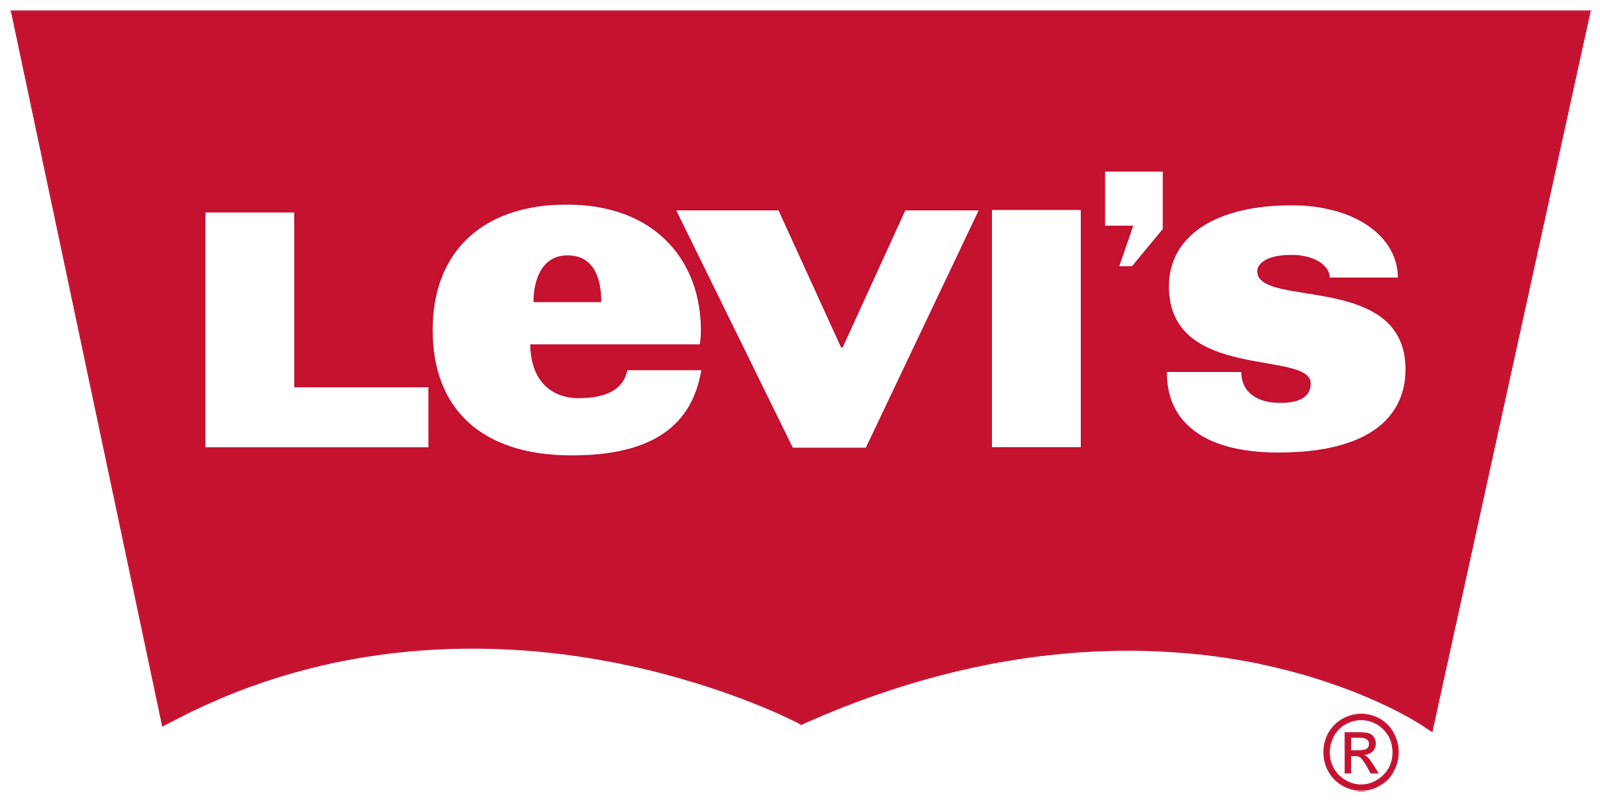 Red Company Logo - Levis Logo, Levis Symbol Meaning, History and Evolution